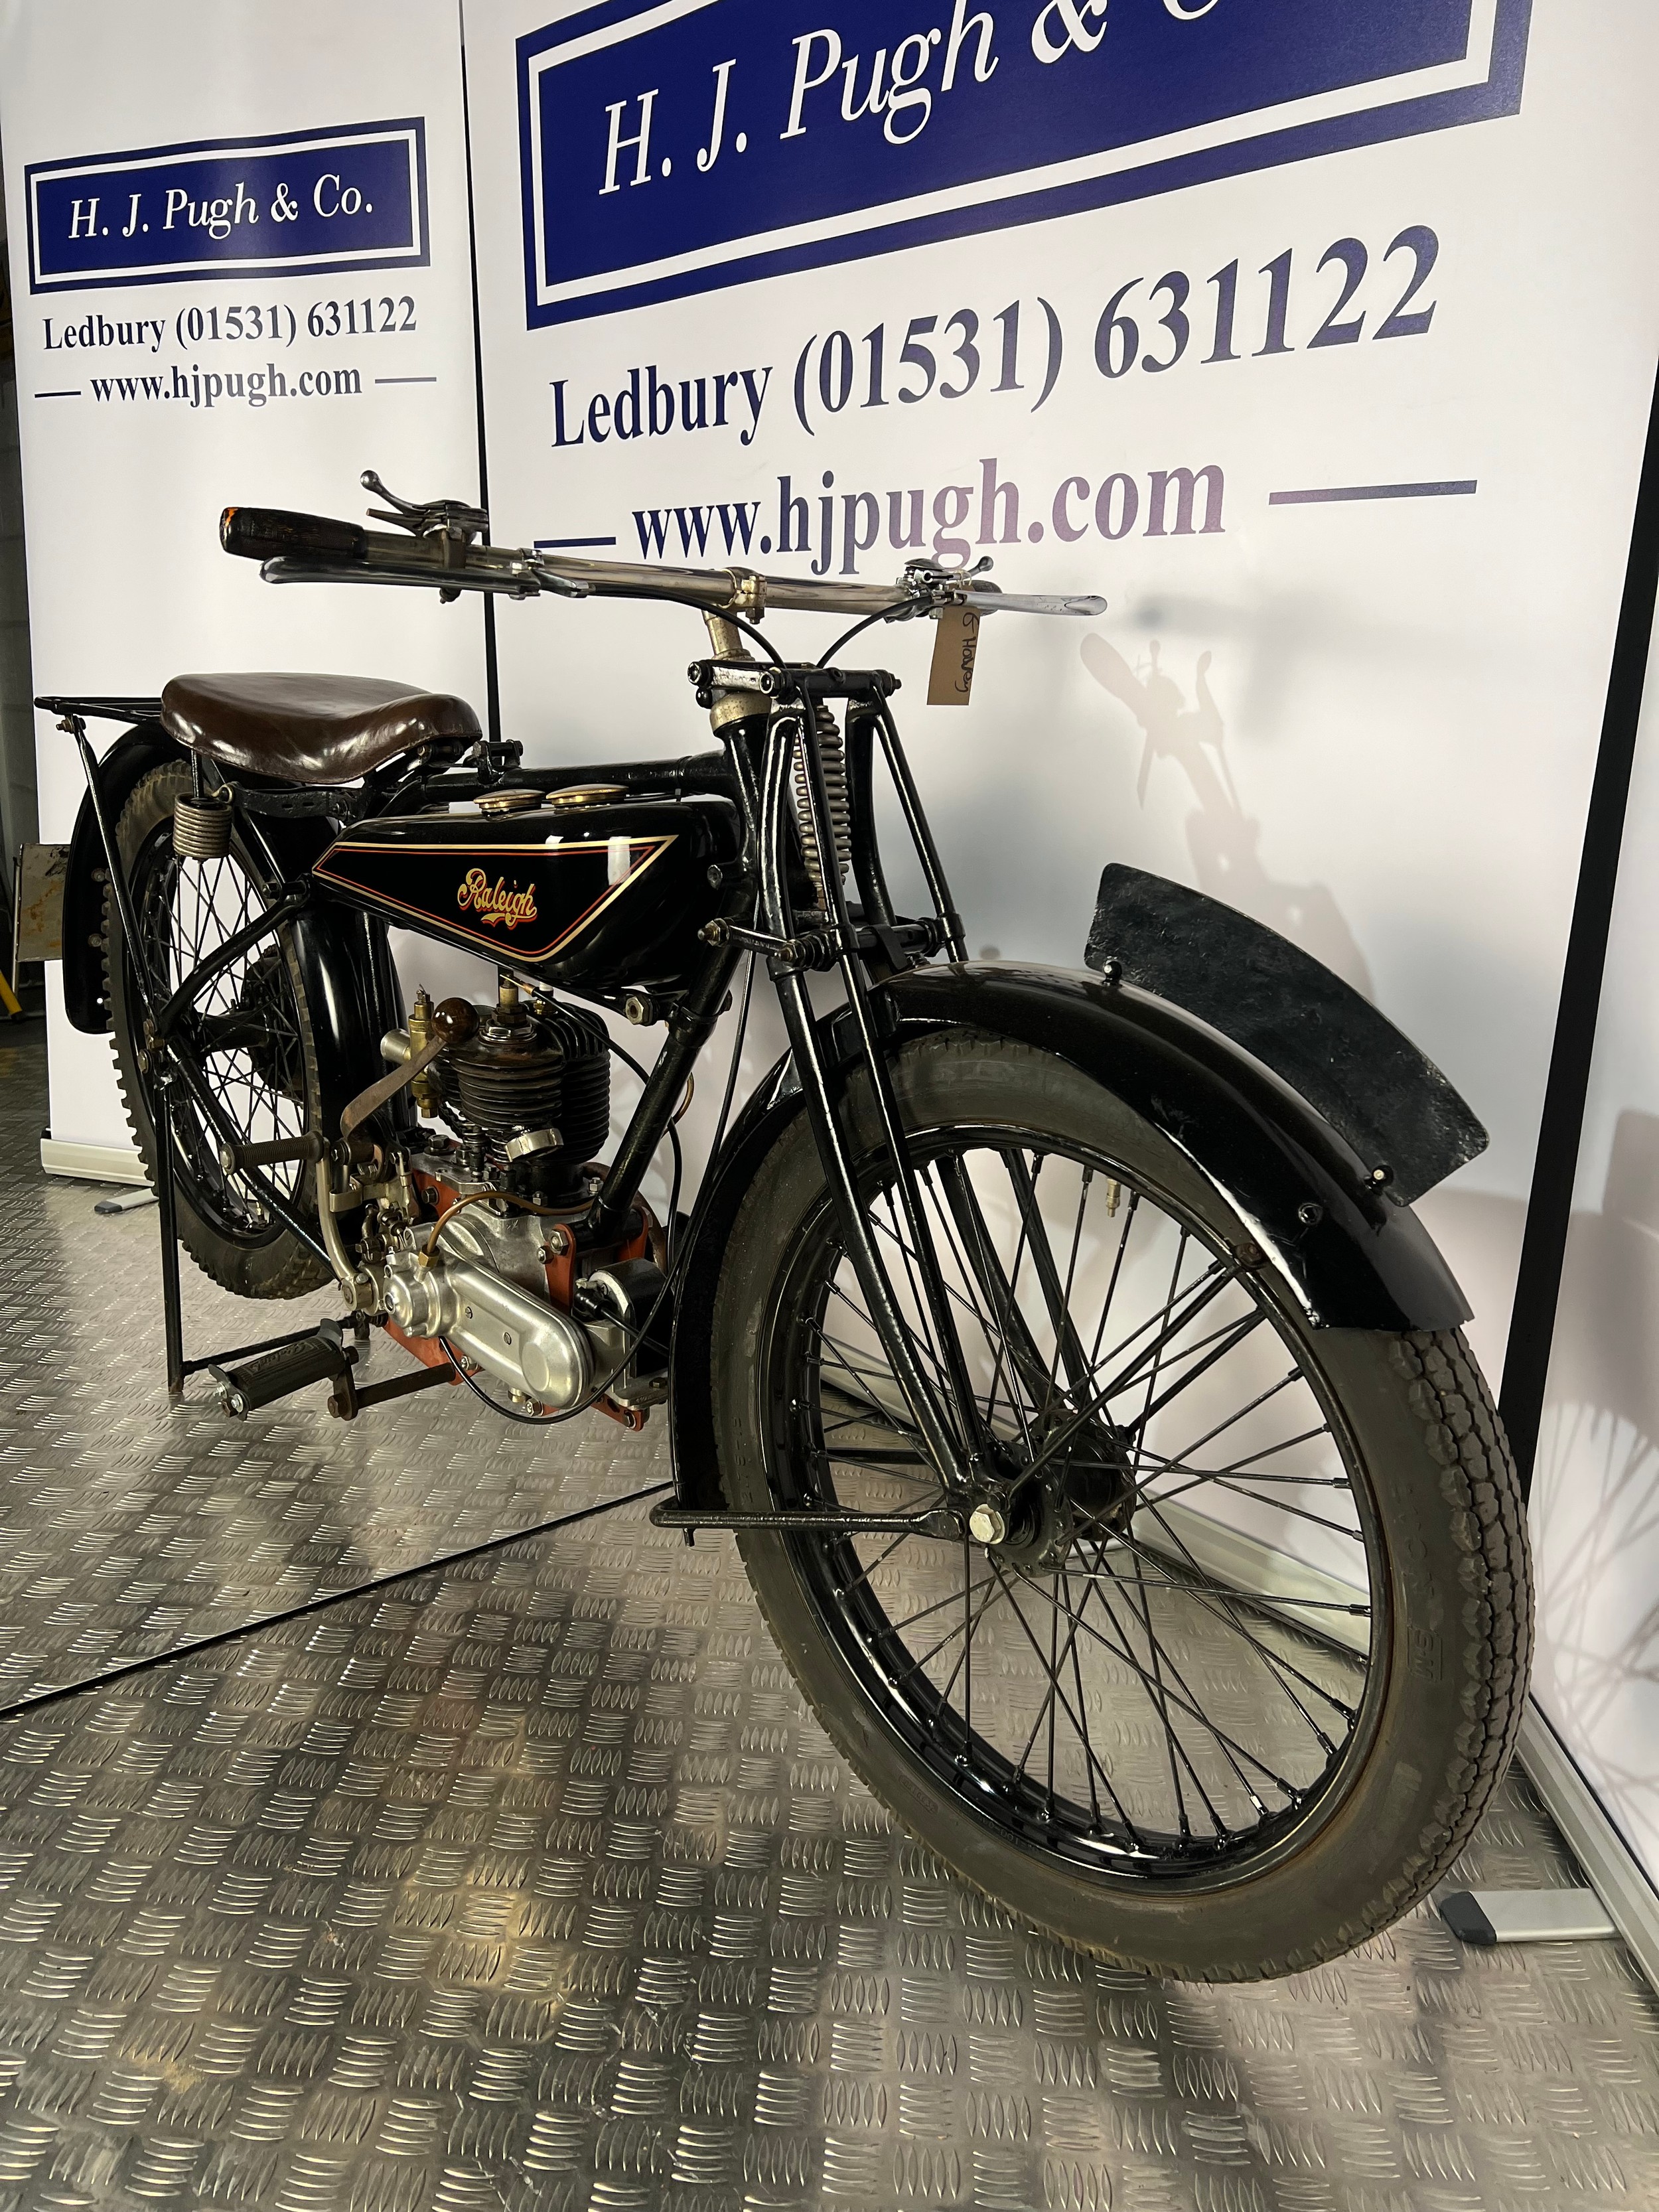 Raleigh Model 15 2¼HP motorcycle. 1924. 250cc. Frame No. 5341 Engine No. M1651 Comes with box of - Image 2 of 8